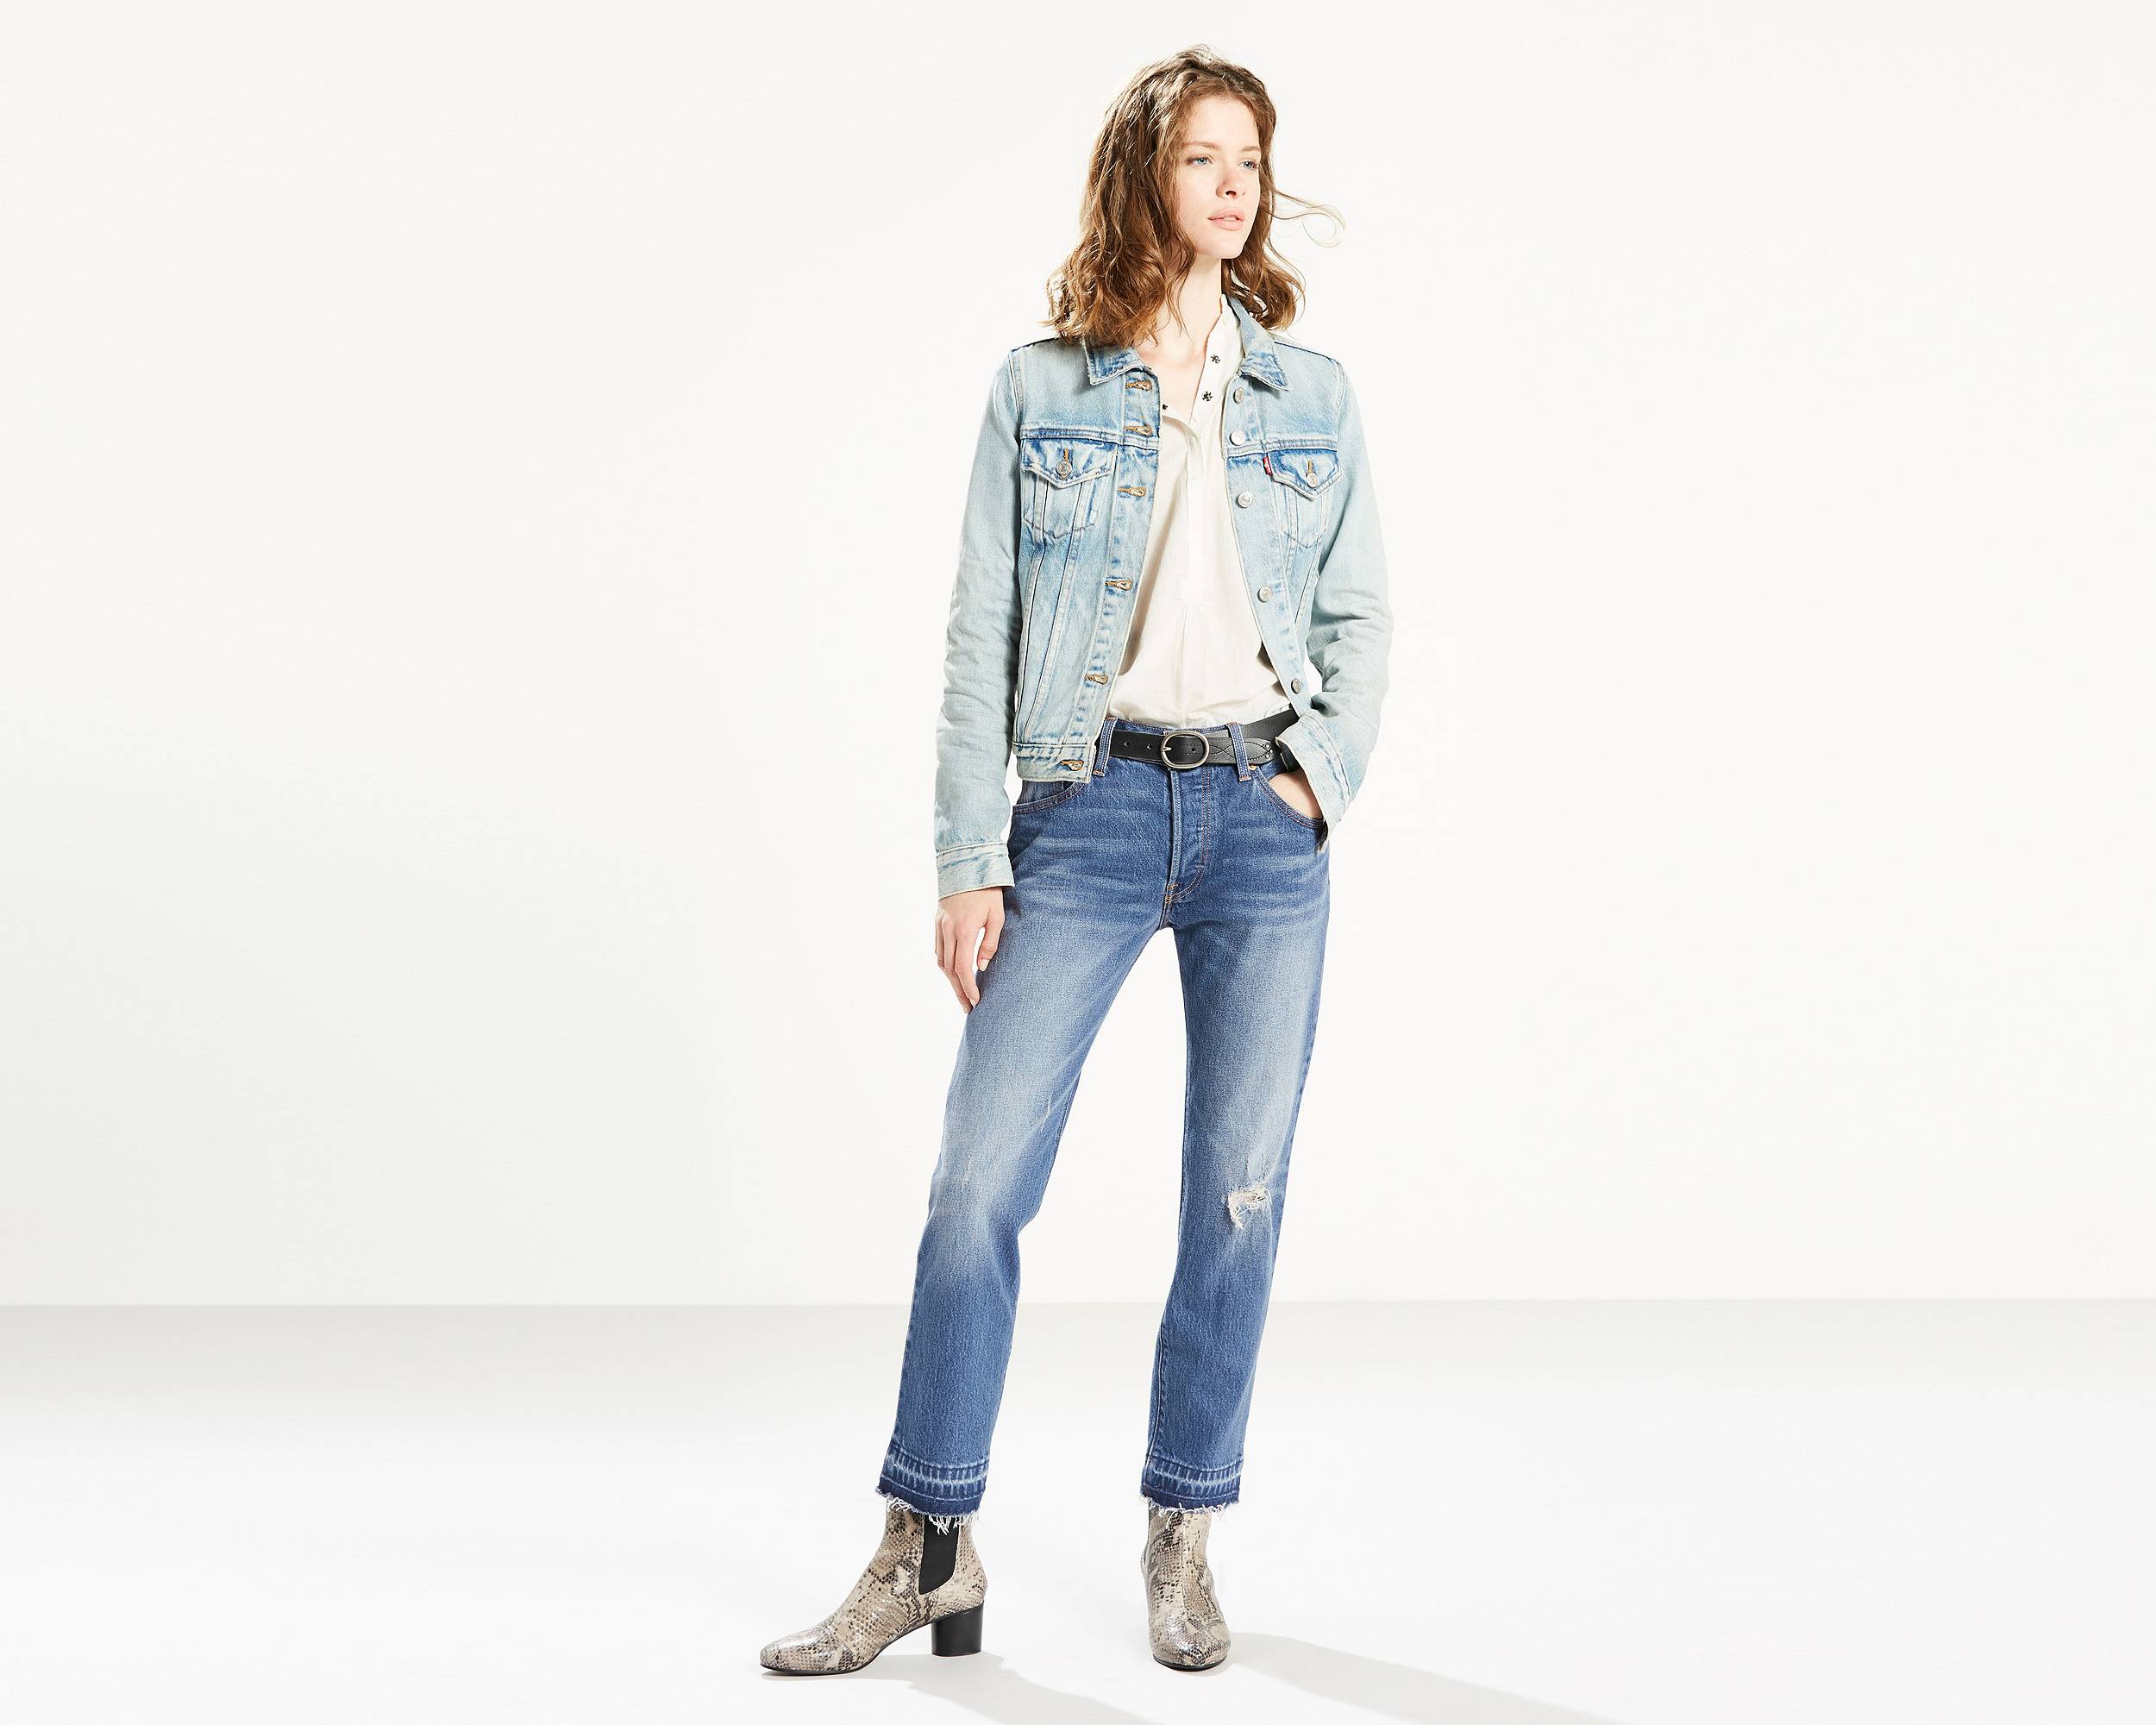 501® Stretch Jeans for Women | Wear & Tear |Levi's® United States (US)